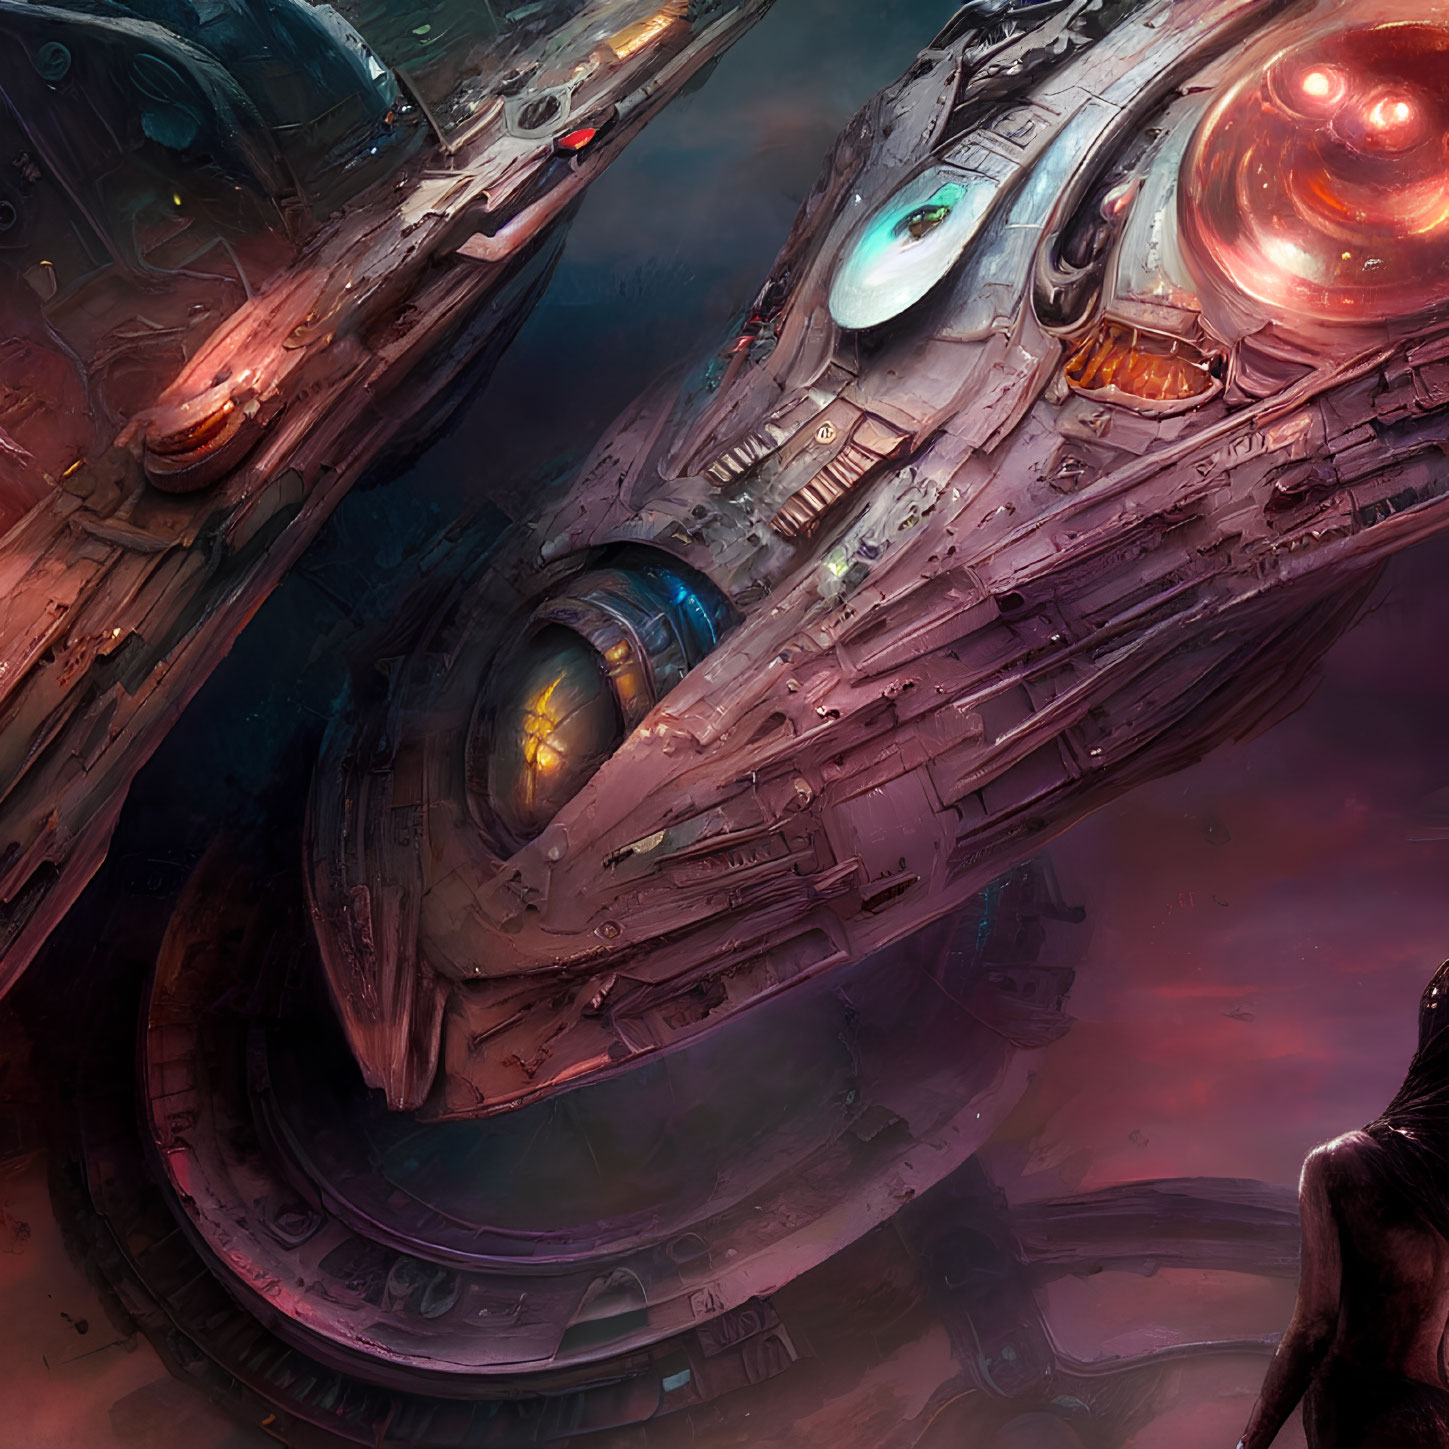 Intricate Spaceships Hover in Colorful Cosmic Scene